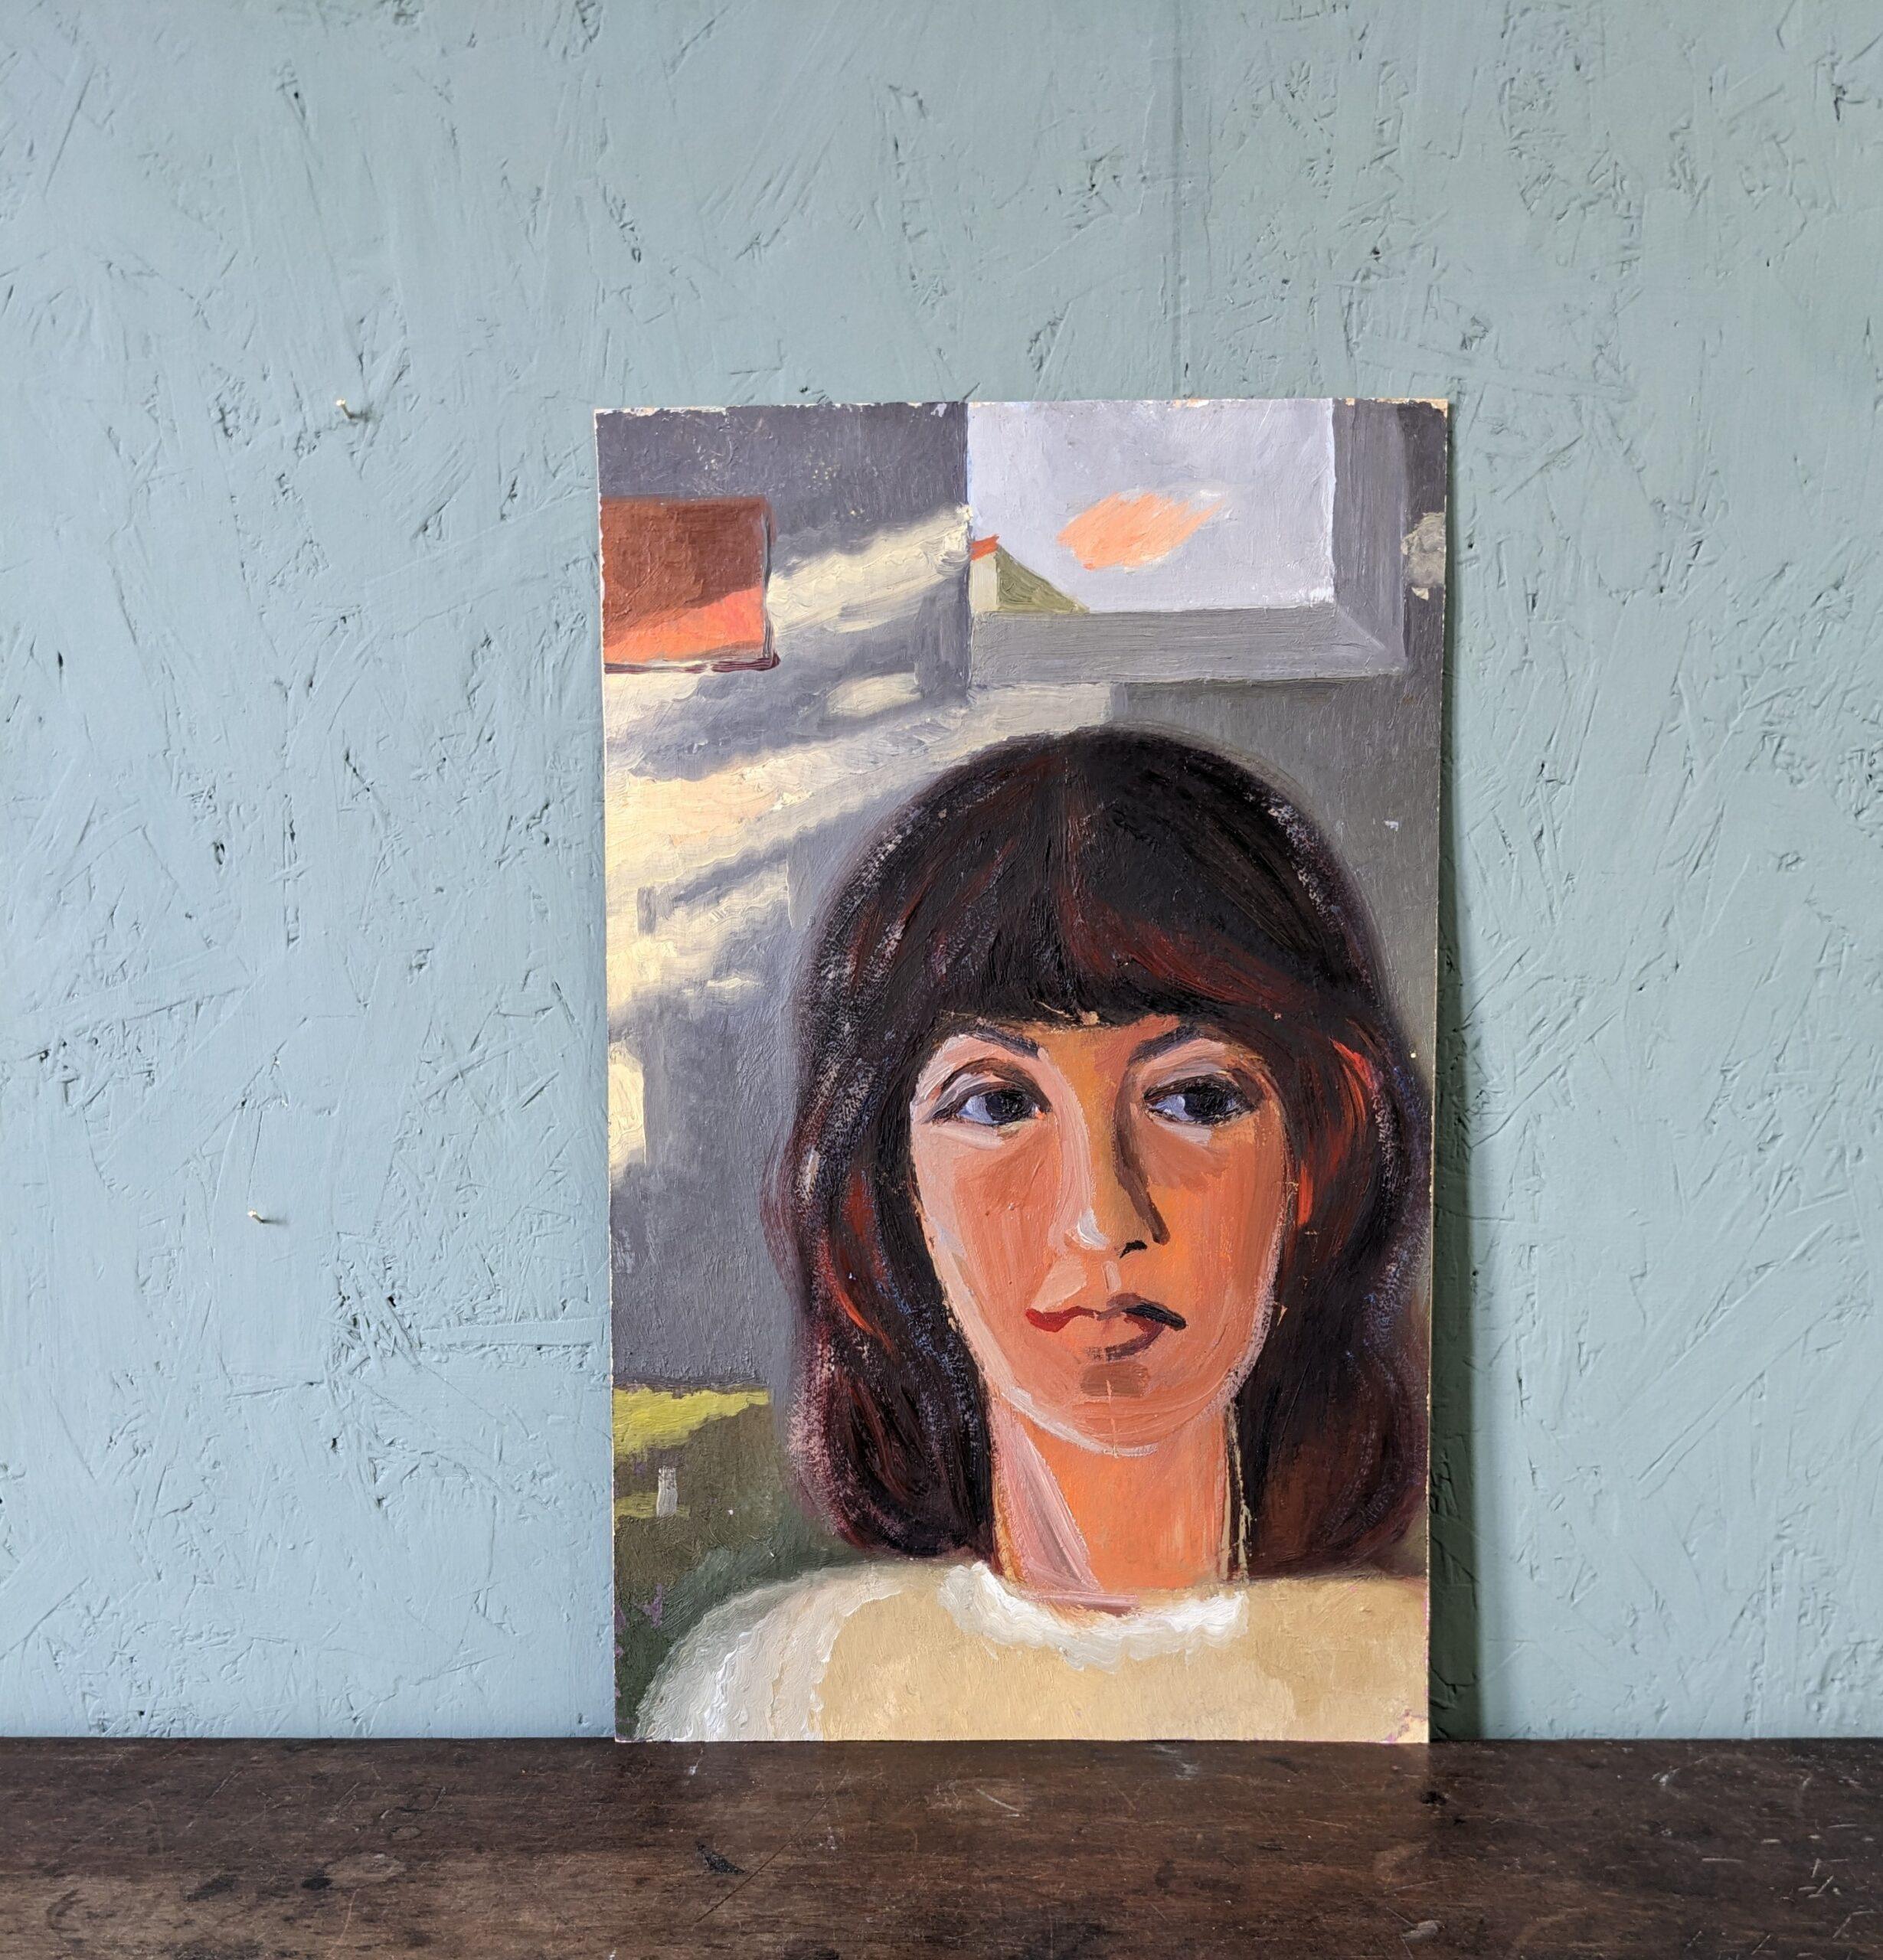 DOUBLE SIDED PORTRAIT II
Size: 48 x 30cm unframed
Oil on board

An intriguing double sided oil on board: one side depicts a pair of women looking into a book, and the other side features a striking single portrait of a woman.

The painting of the